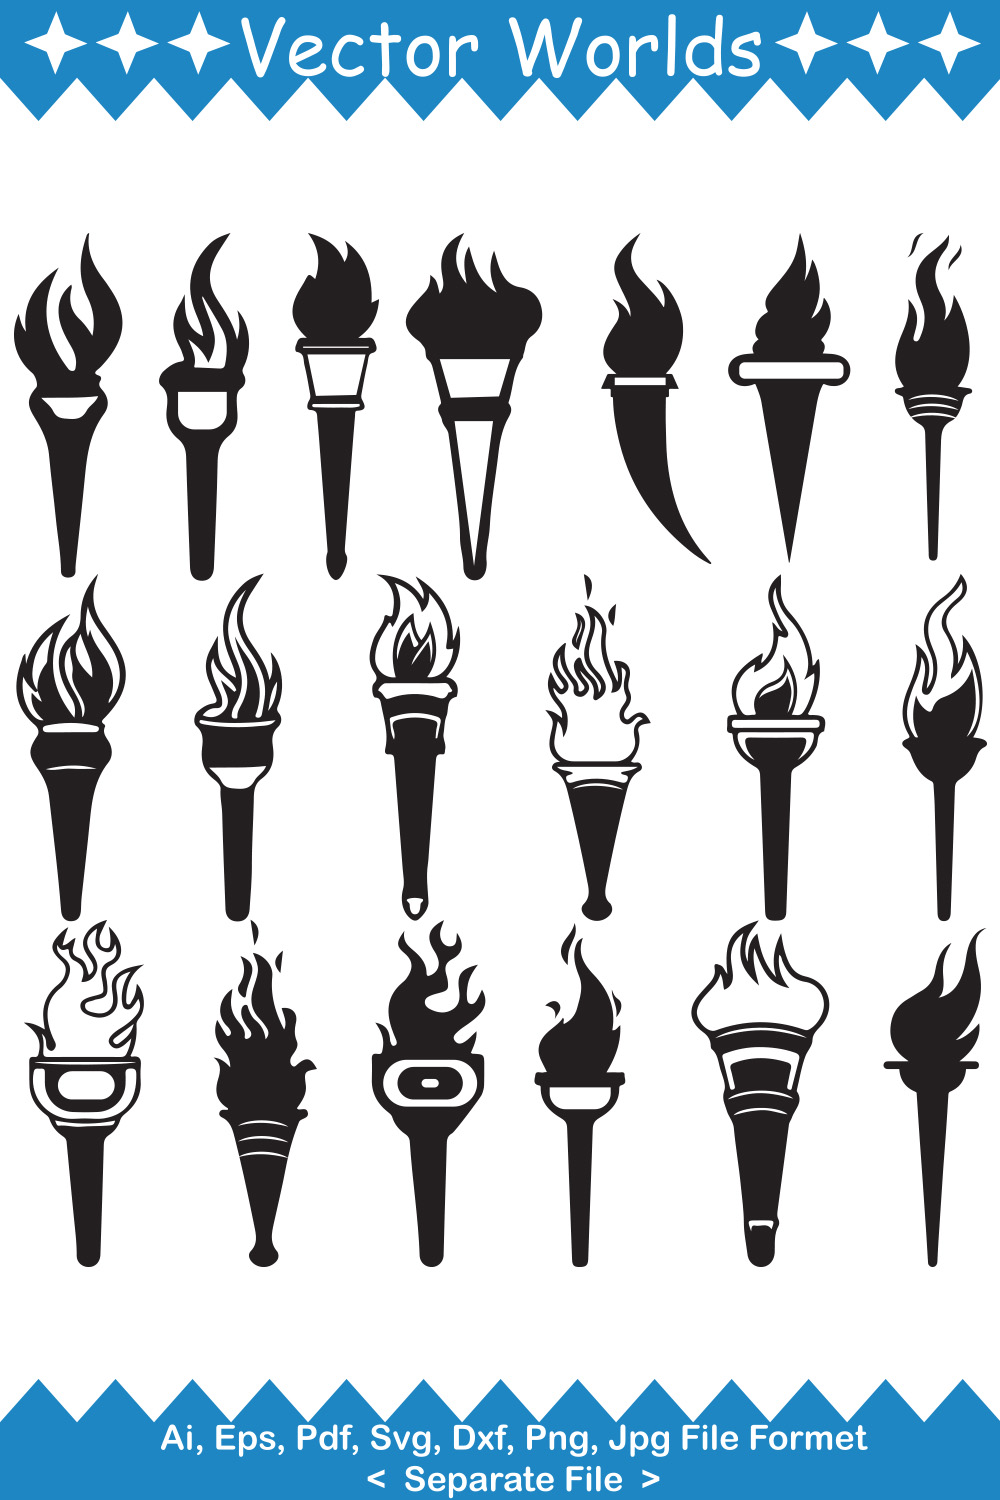 Collection of vector amazing silhouette images of burning torches.